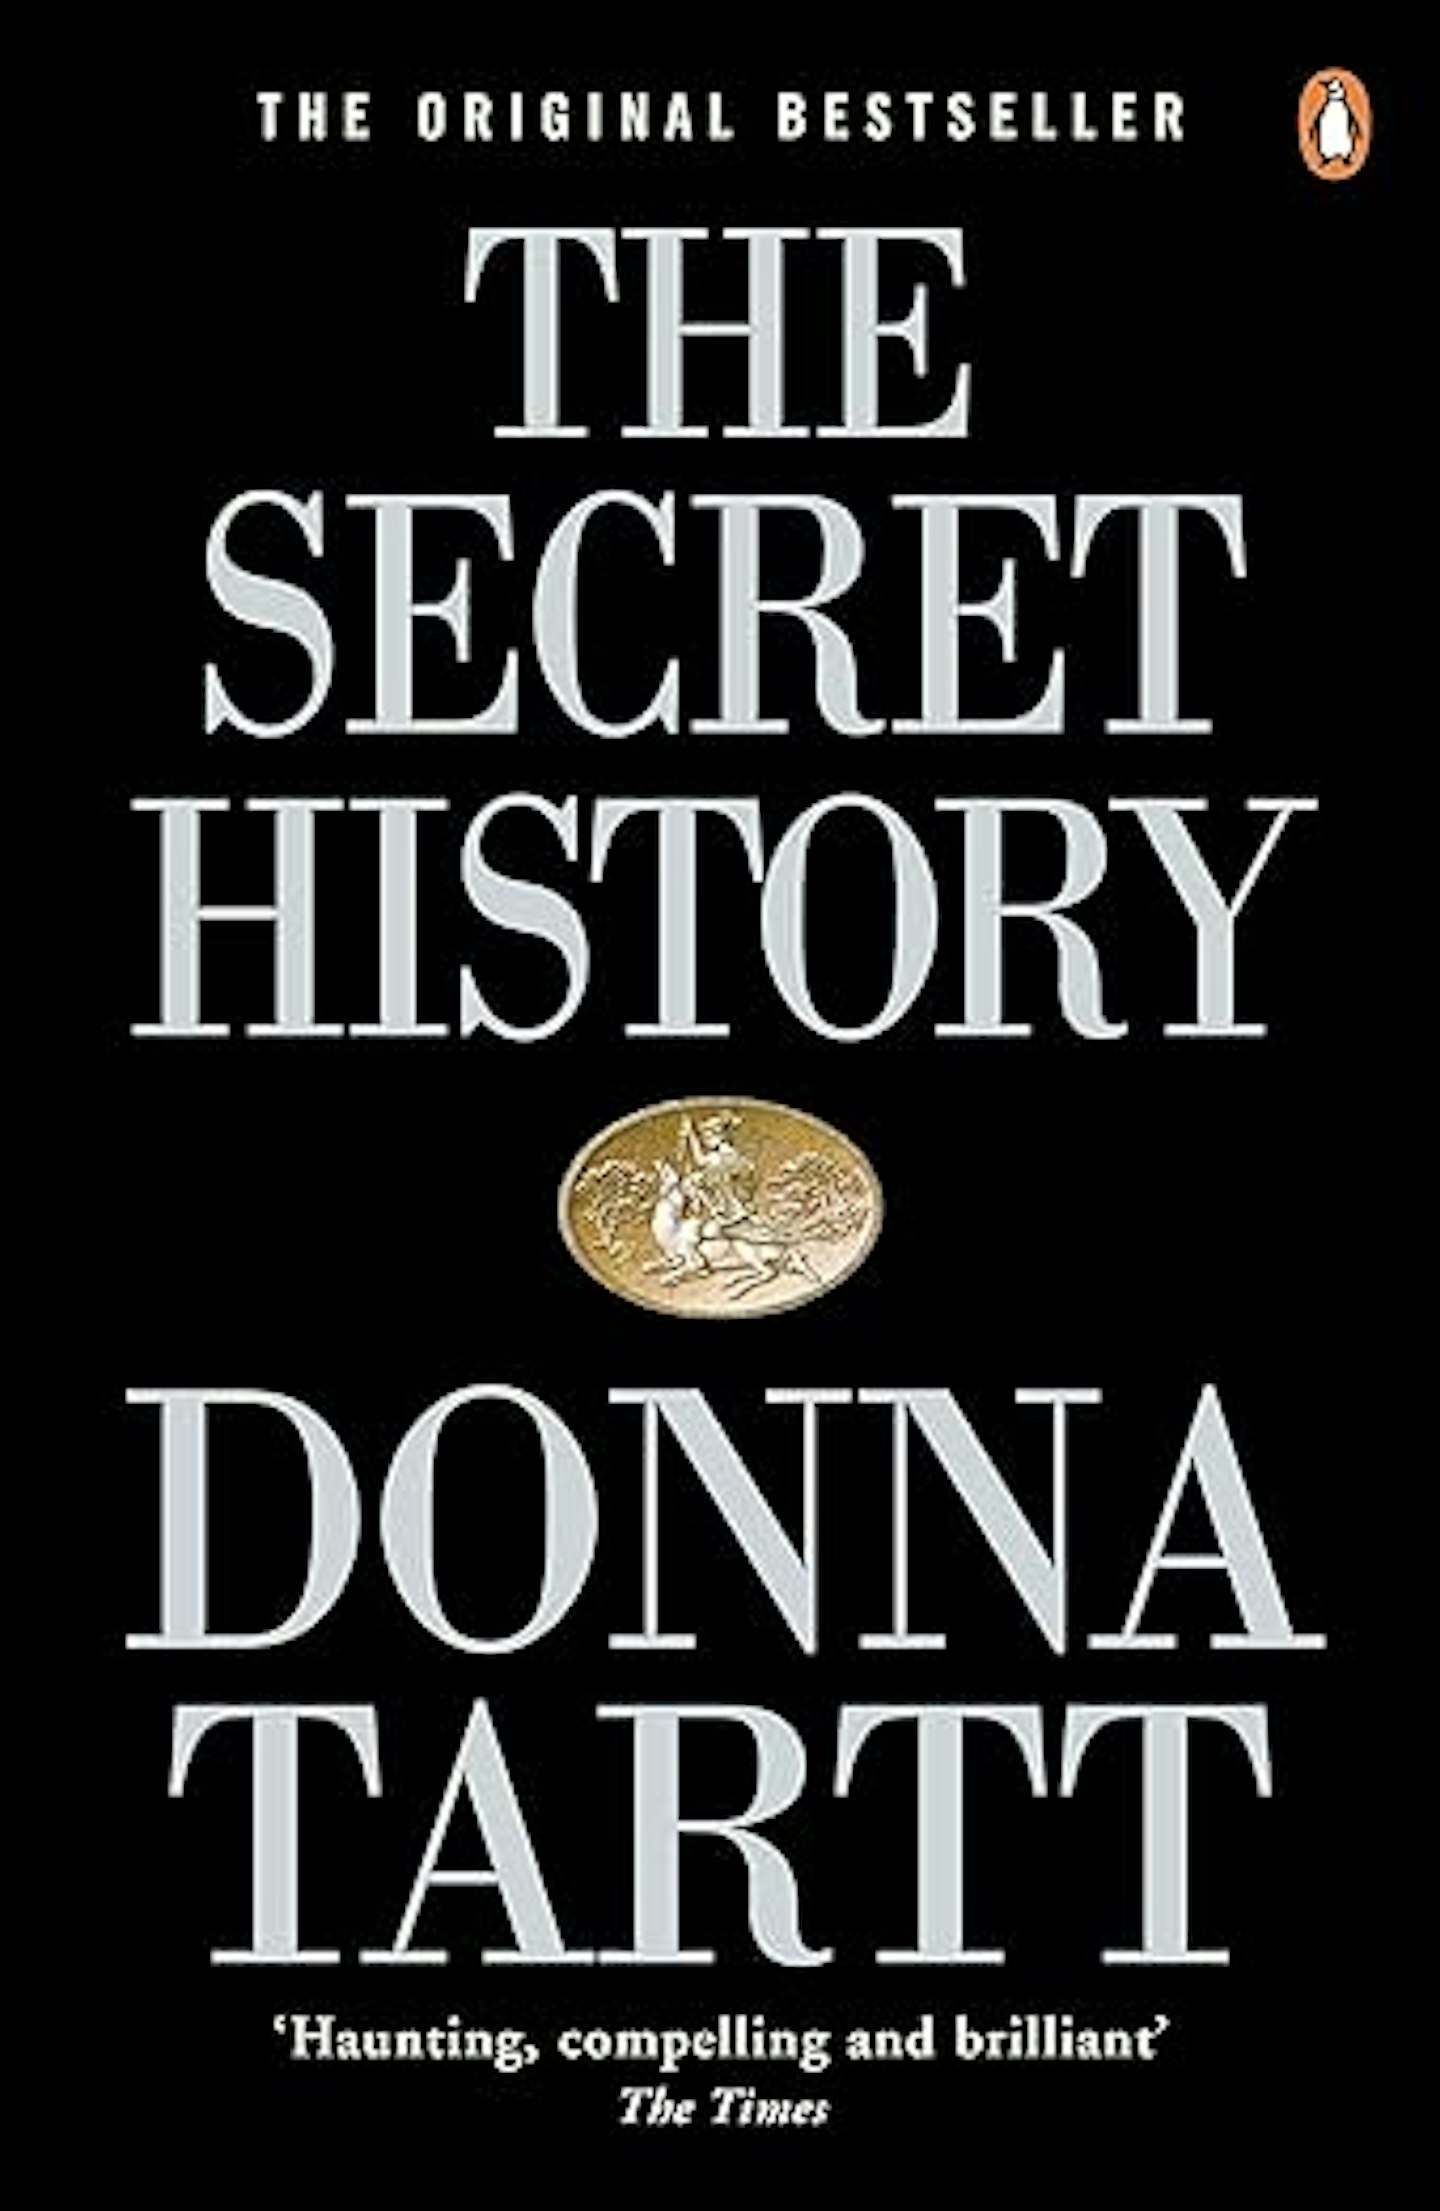 The Secret History by Donna Tartt book cover